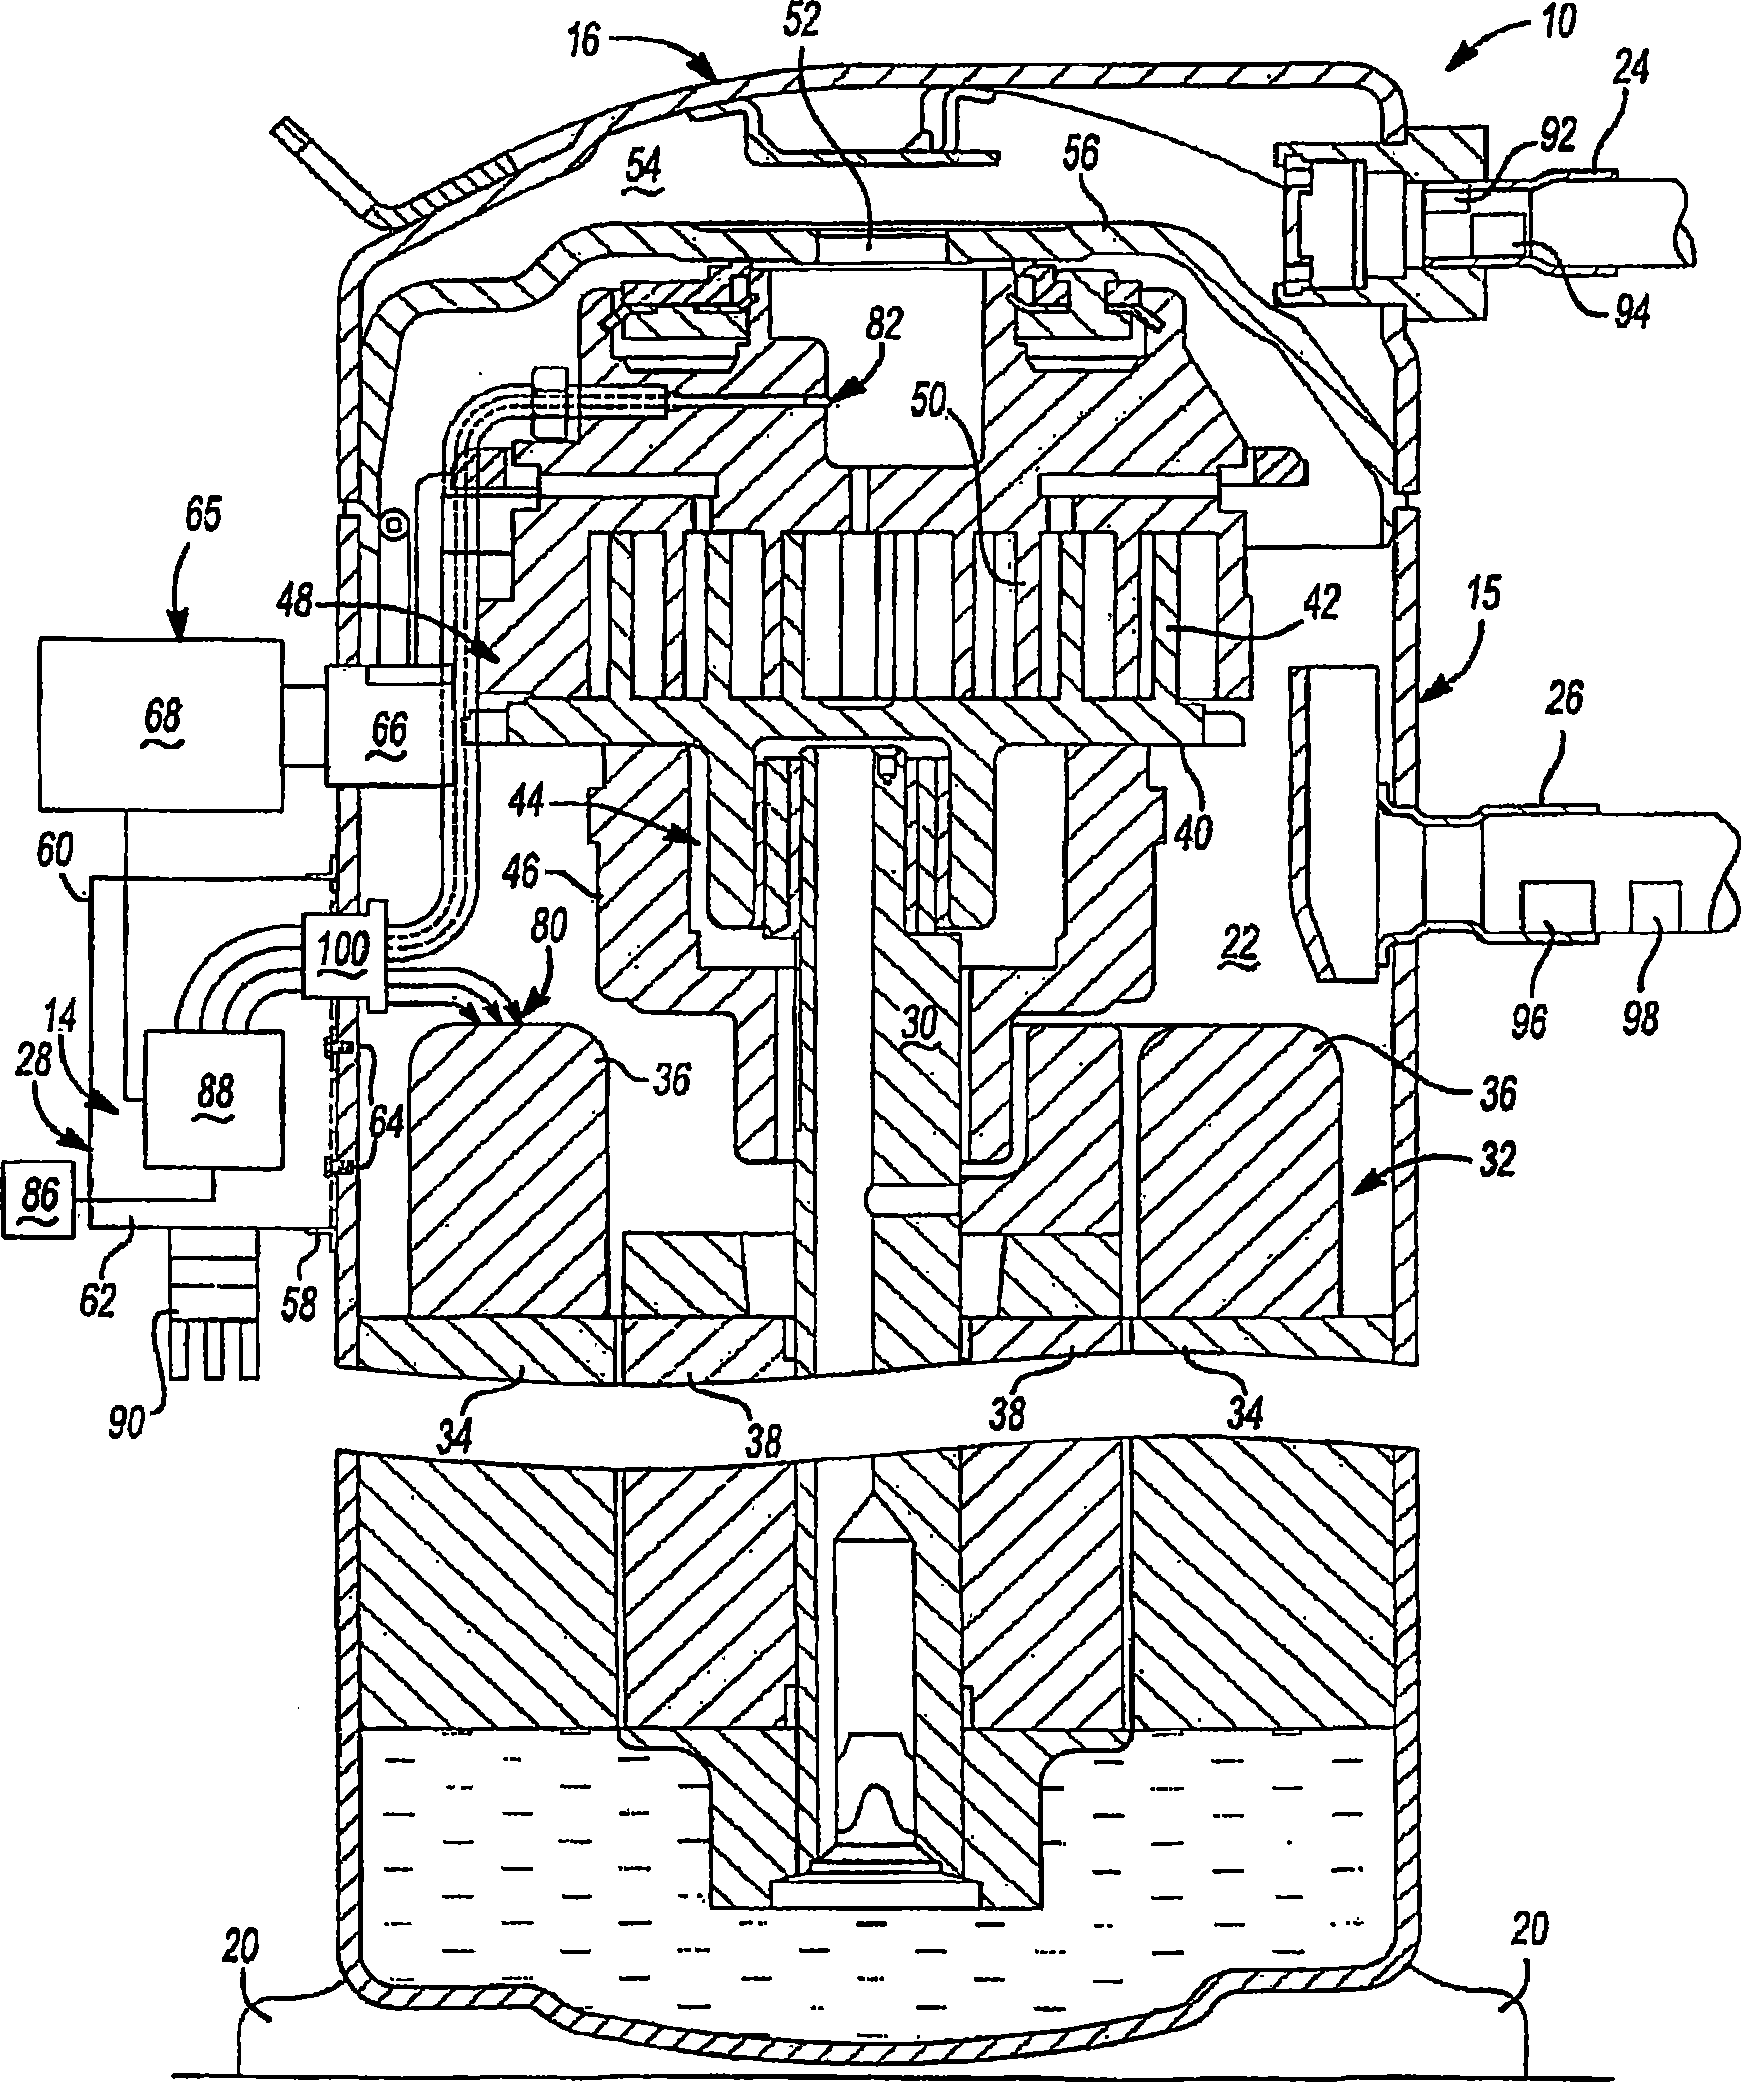 Protection and diagnostic module for a refrigeration system